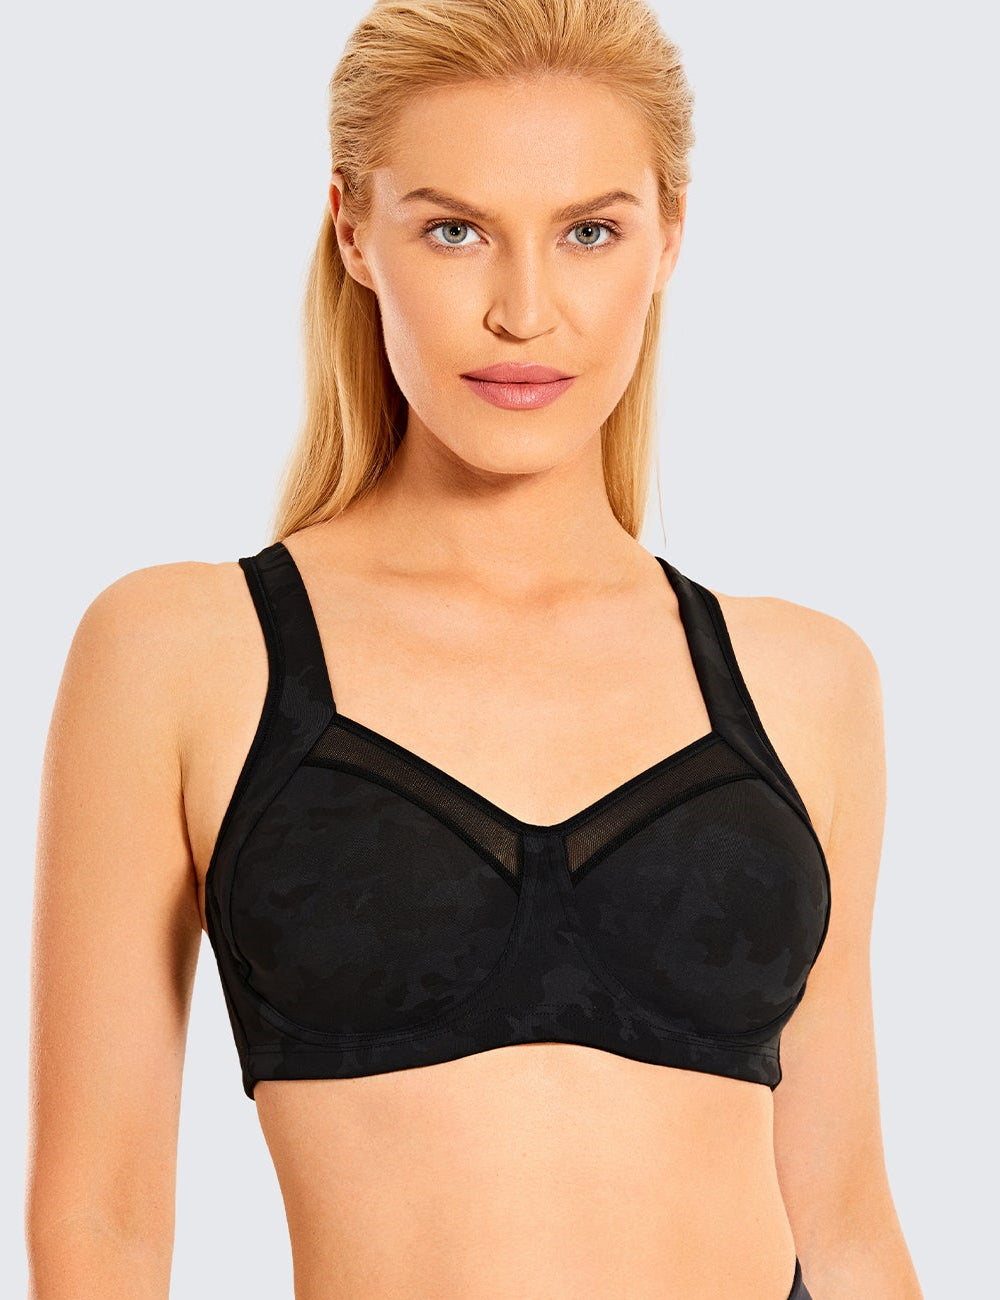 SYROKAN Women's Underwire Push Up Firm Support Contour High Impact Sports  Bra, Black, 90C : Buy Online at Best Price in KSA - Souq is now :  Fashion